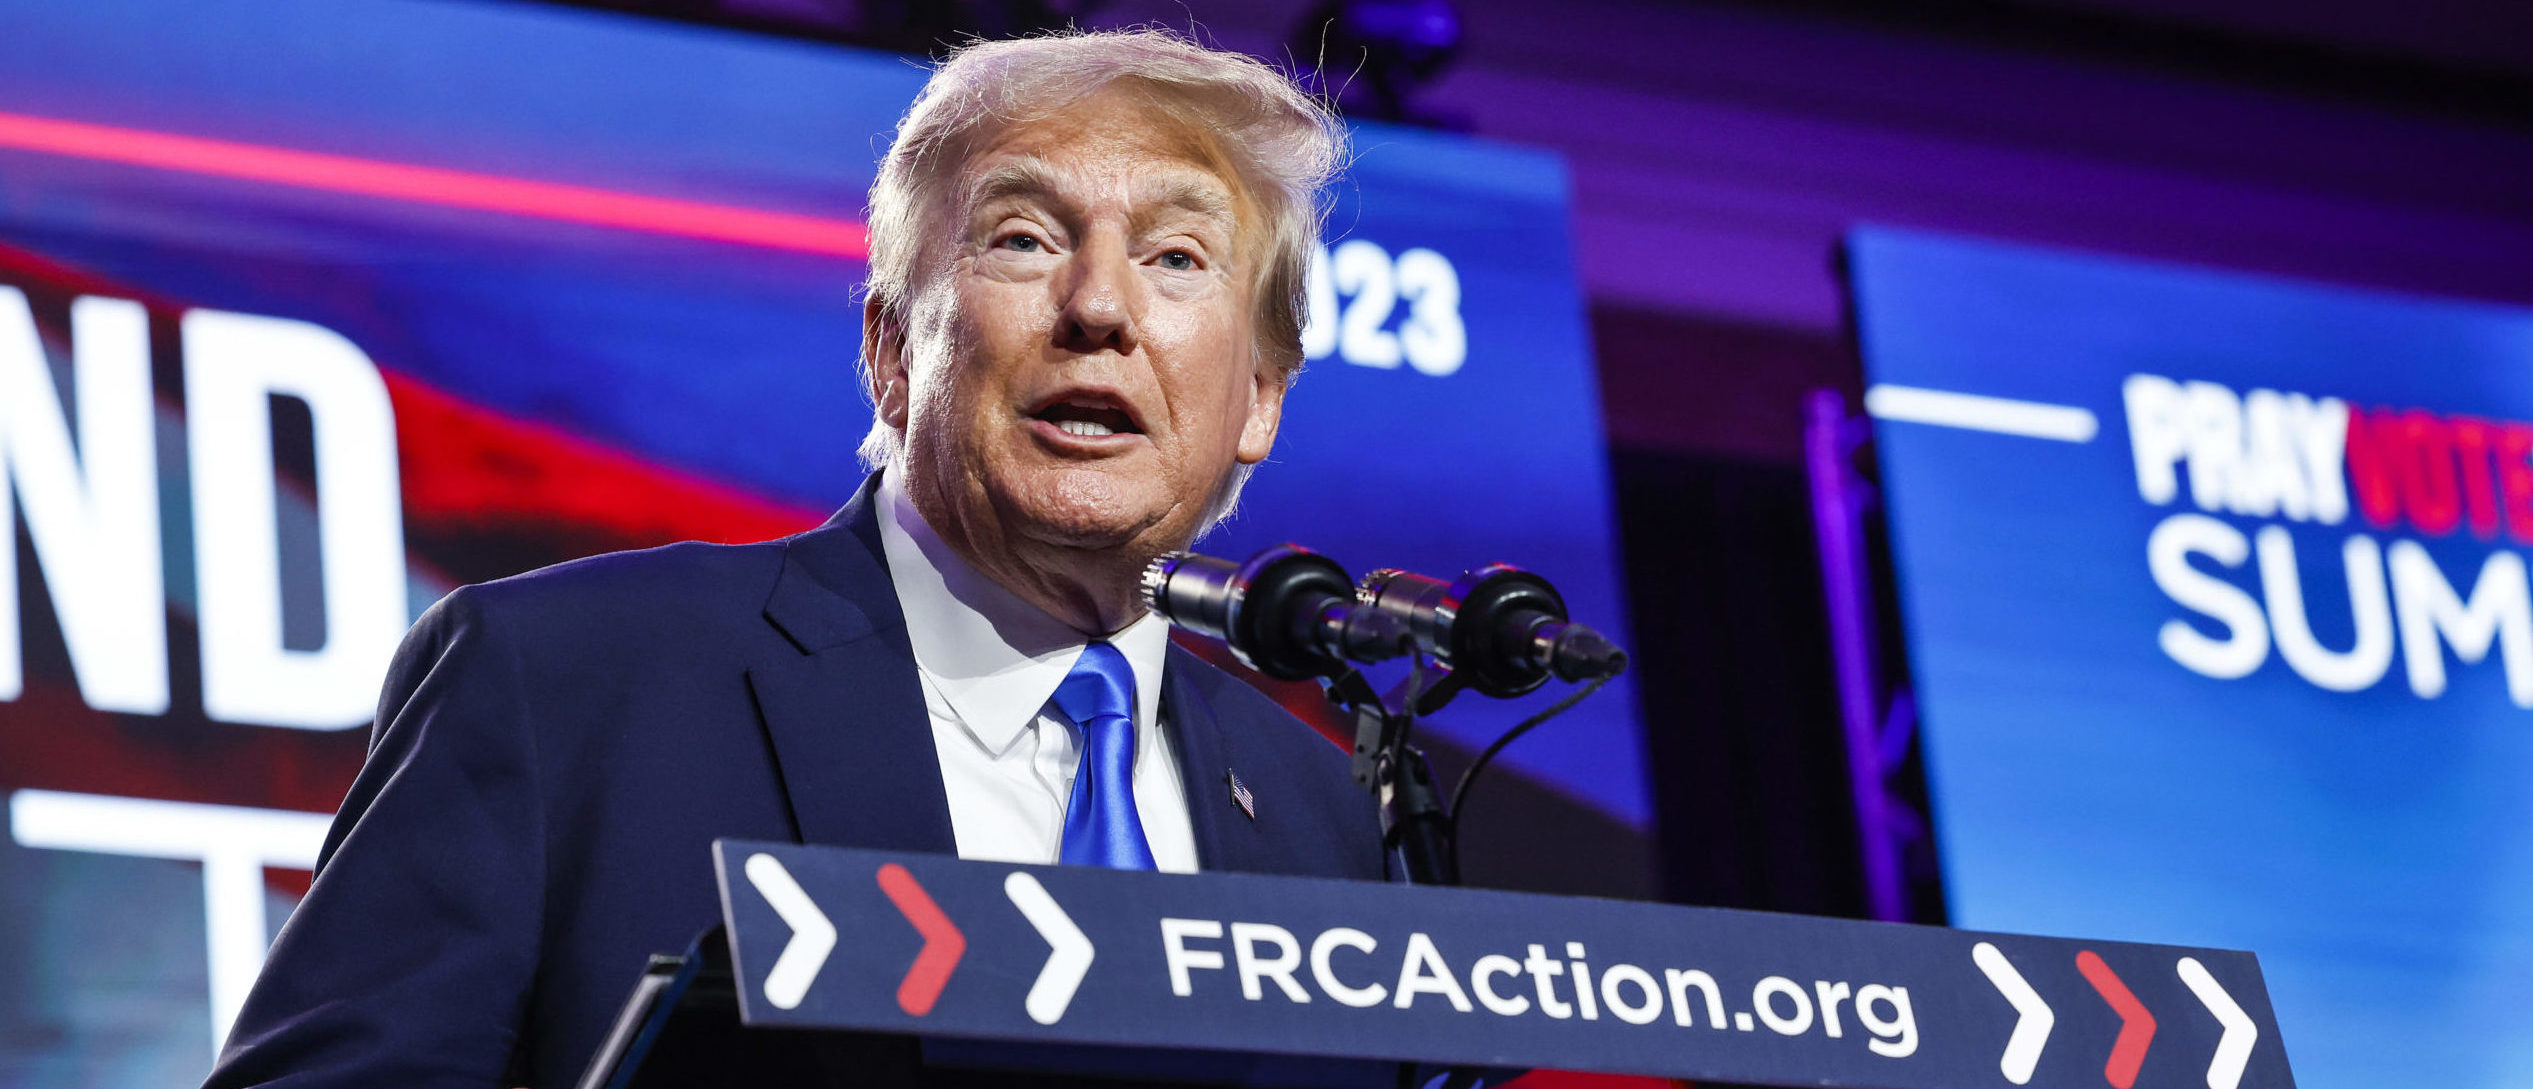 Republican presidential candidate, former President Donald Trump speaks at the Pray Vote Stand Summit at the Omni Shoreham Hotel on September 15, 2023 in Washington, DC. (Photo by Anna Moneymaker/Getty Images)